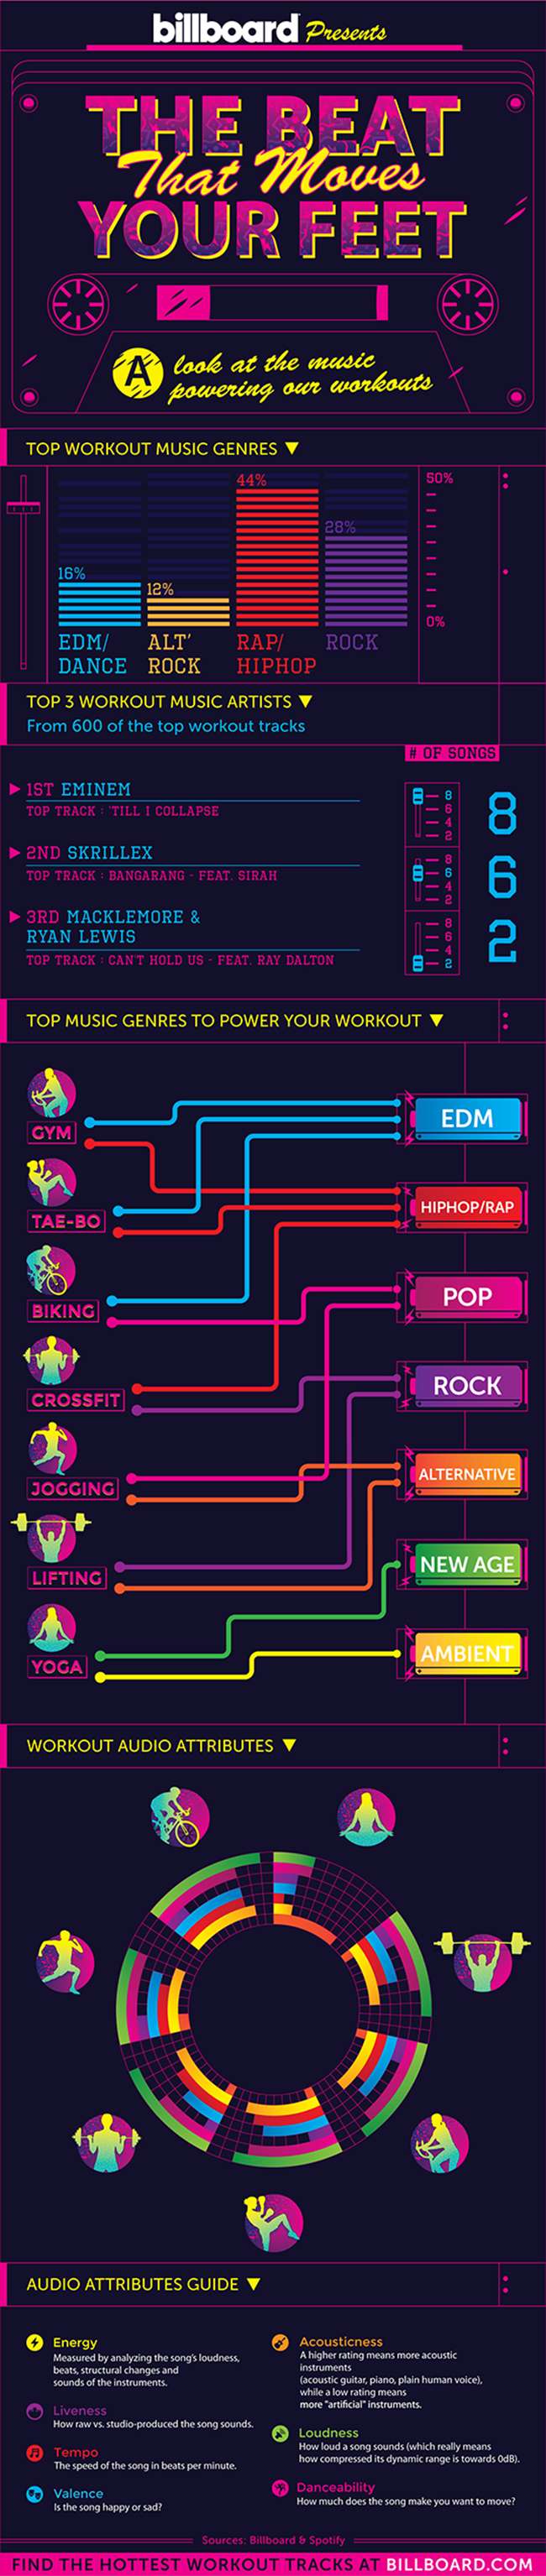 billboard beat that moves your feet workout playlist infographic